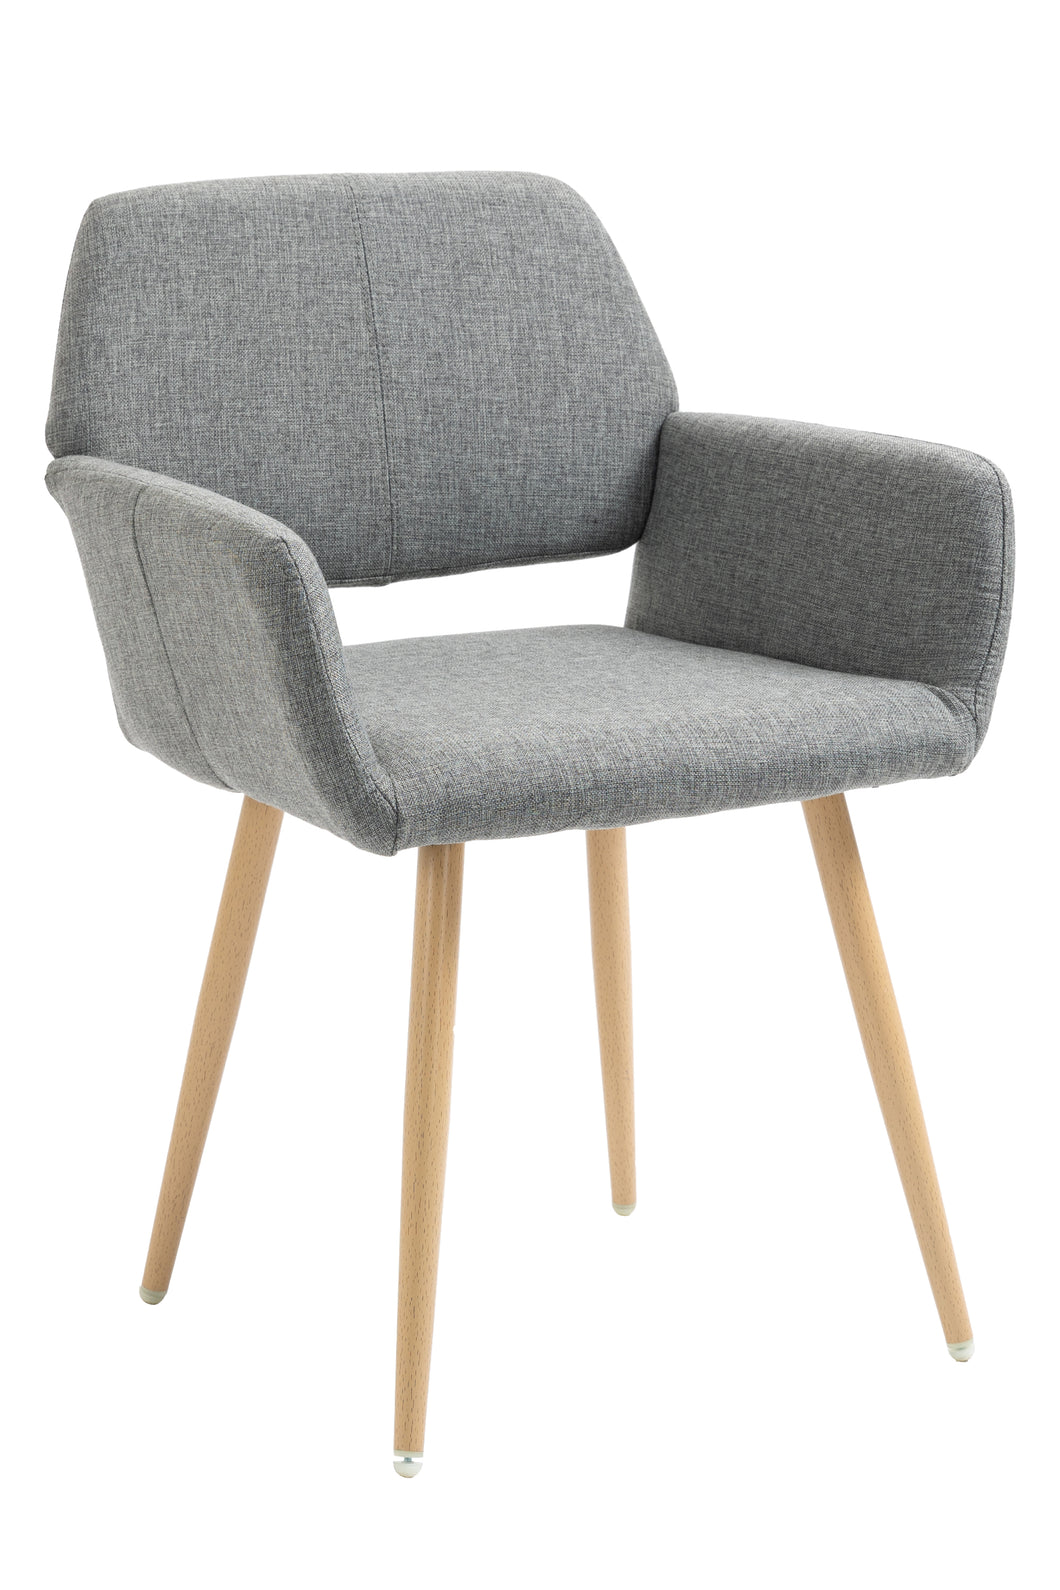 Fabric Upholstered Side Dining Chair with Metal Leg(Gray fabric+Beech Wooden Printing Leg),KD backrest